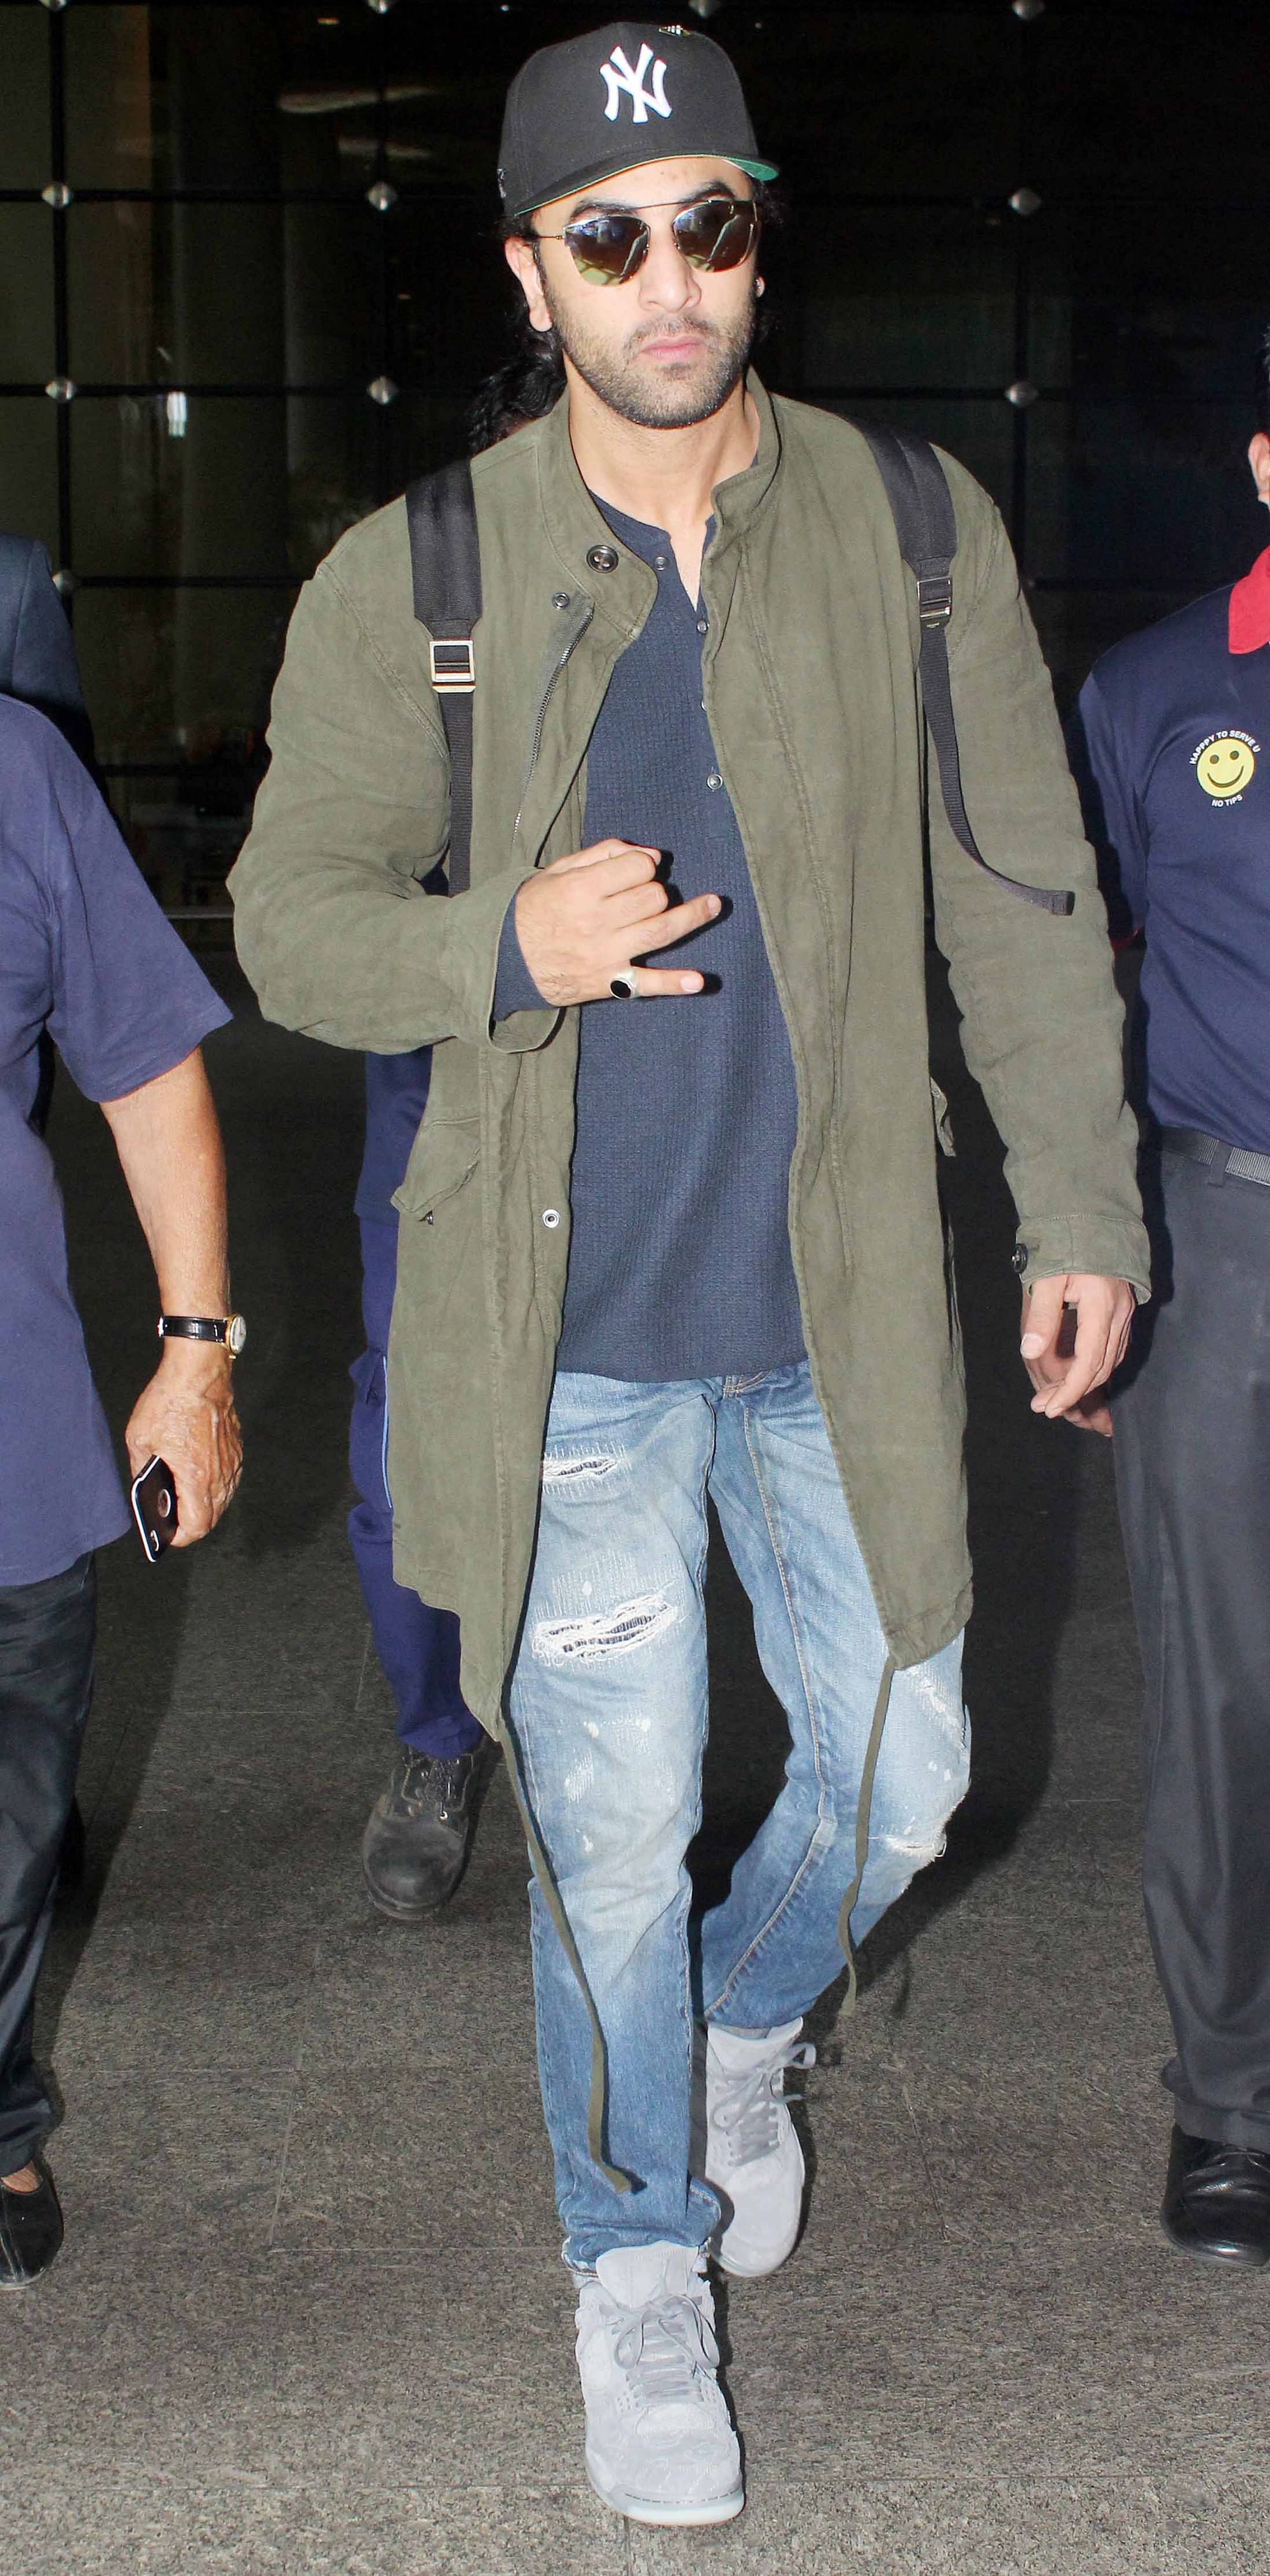 Ranbir Kapoor and Anushka Sharma were spotted at Mumbai airport recently.  While Ranbir sported a casual lo…